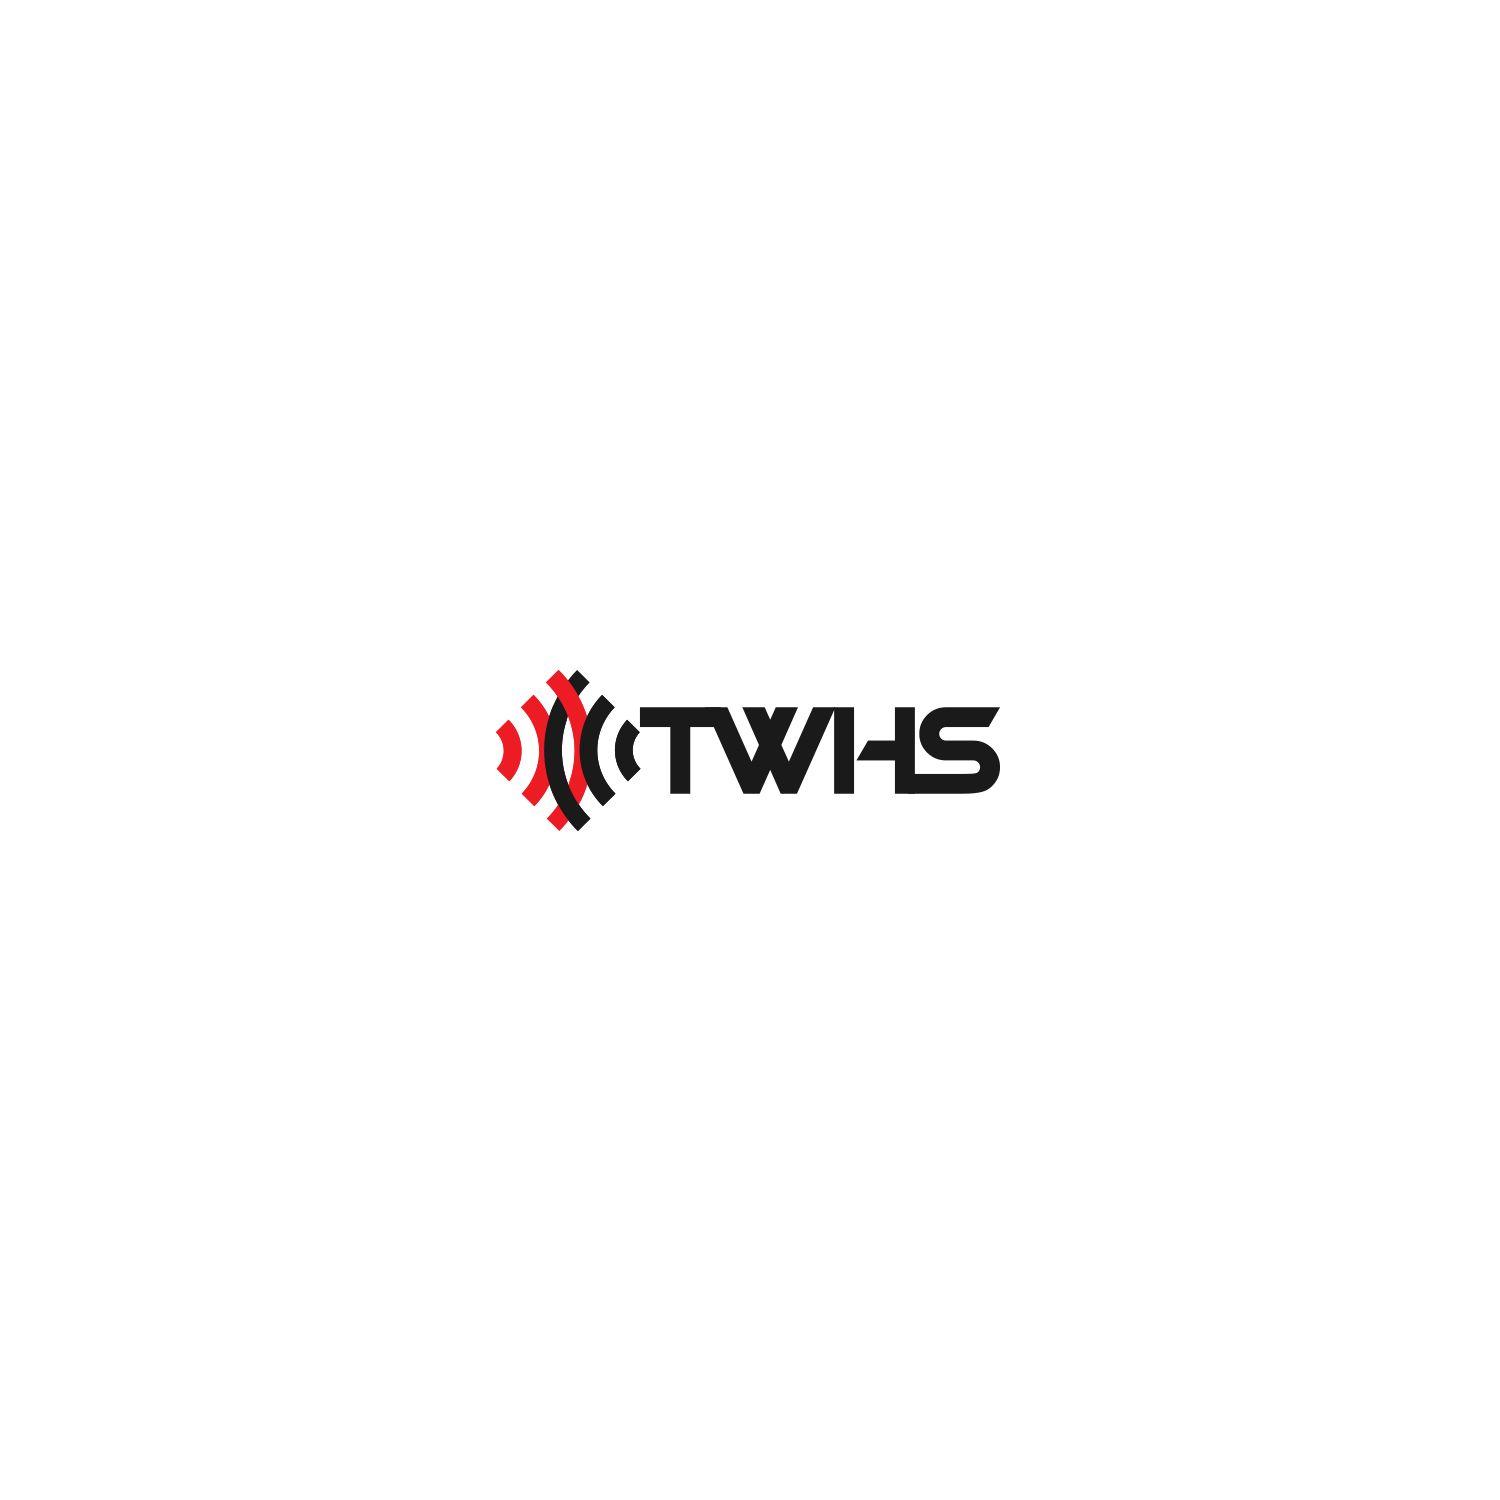 TWHS Logo - Professional, Conservative, Communications Logo Design for TWHS by M ...